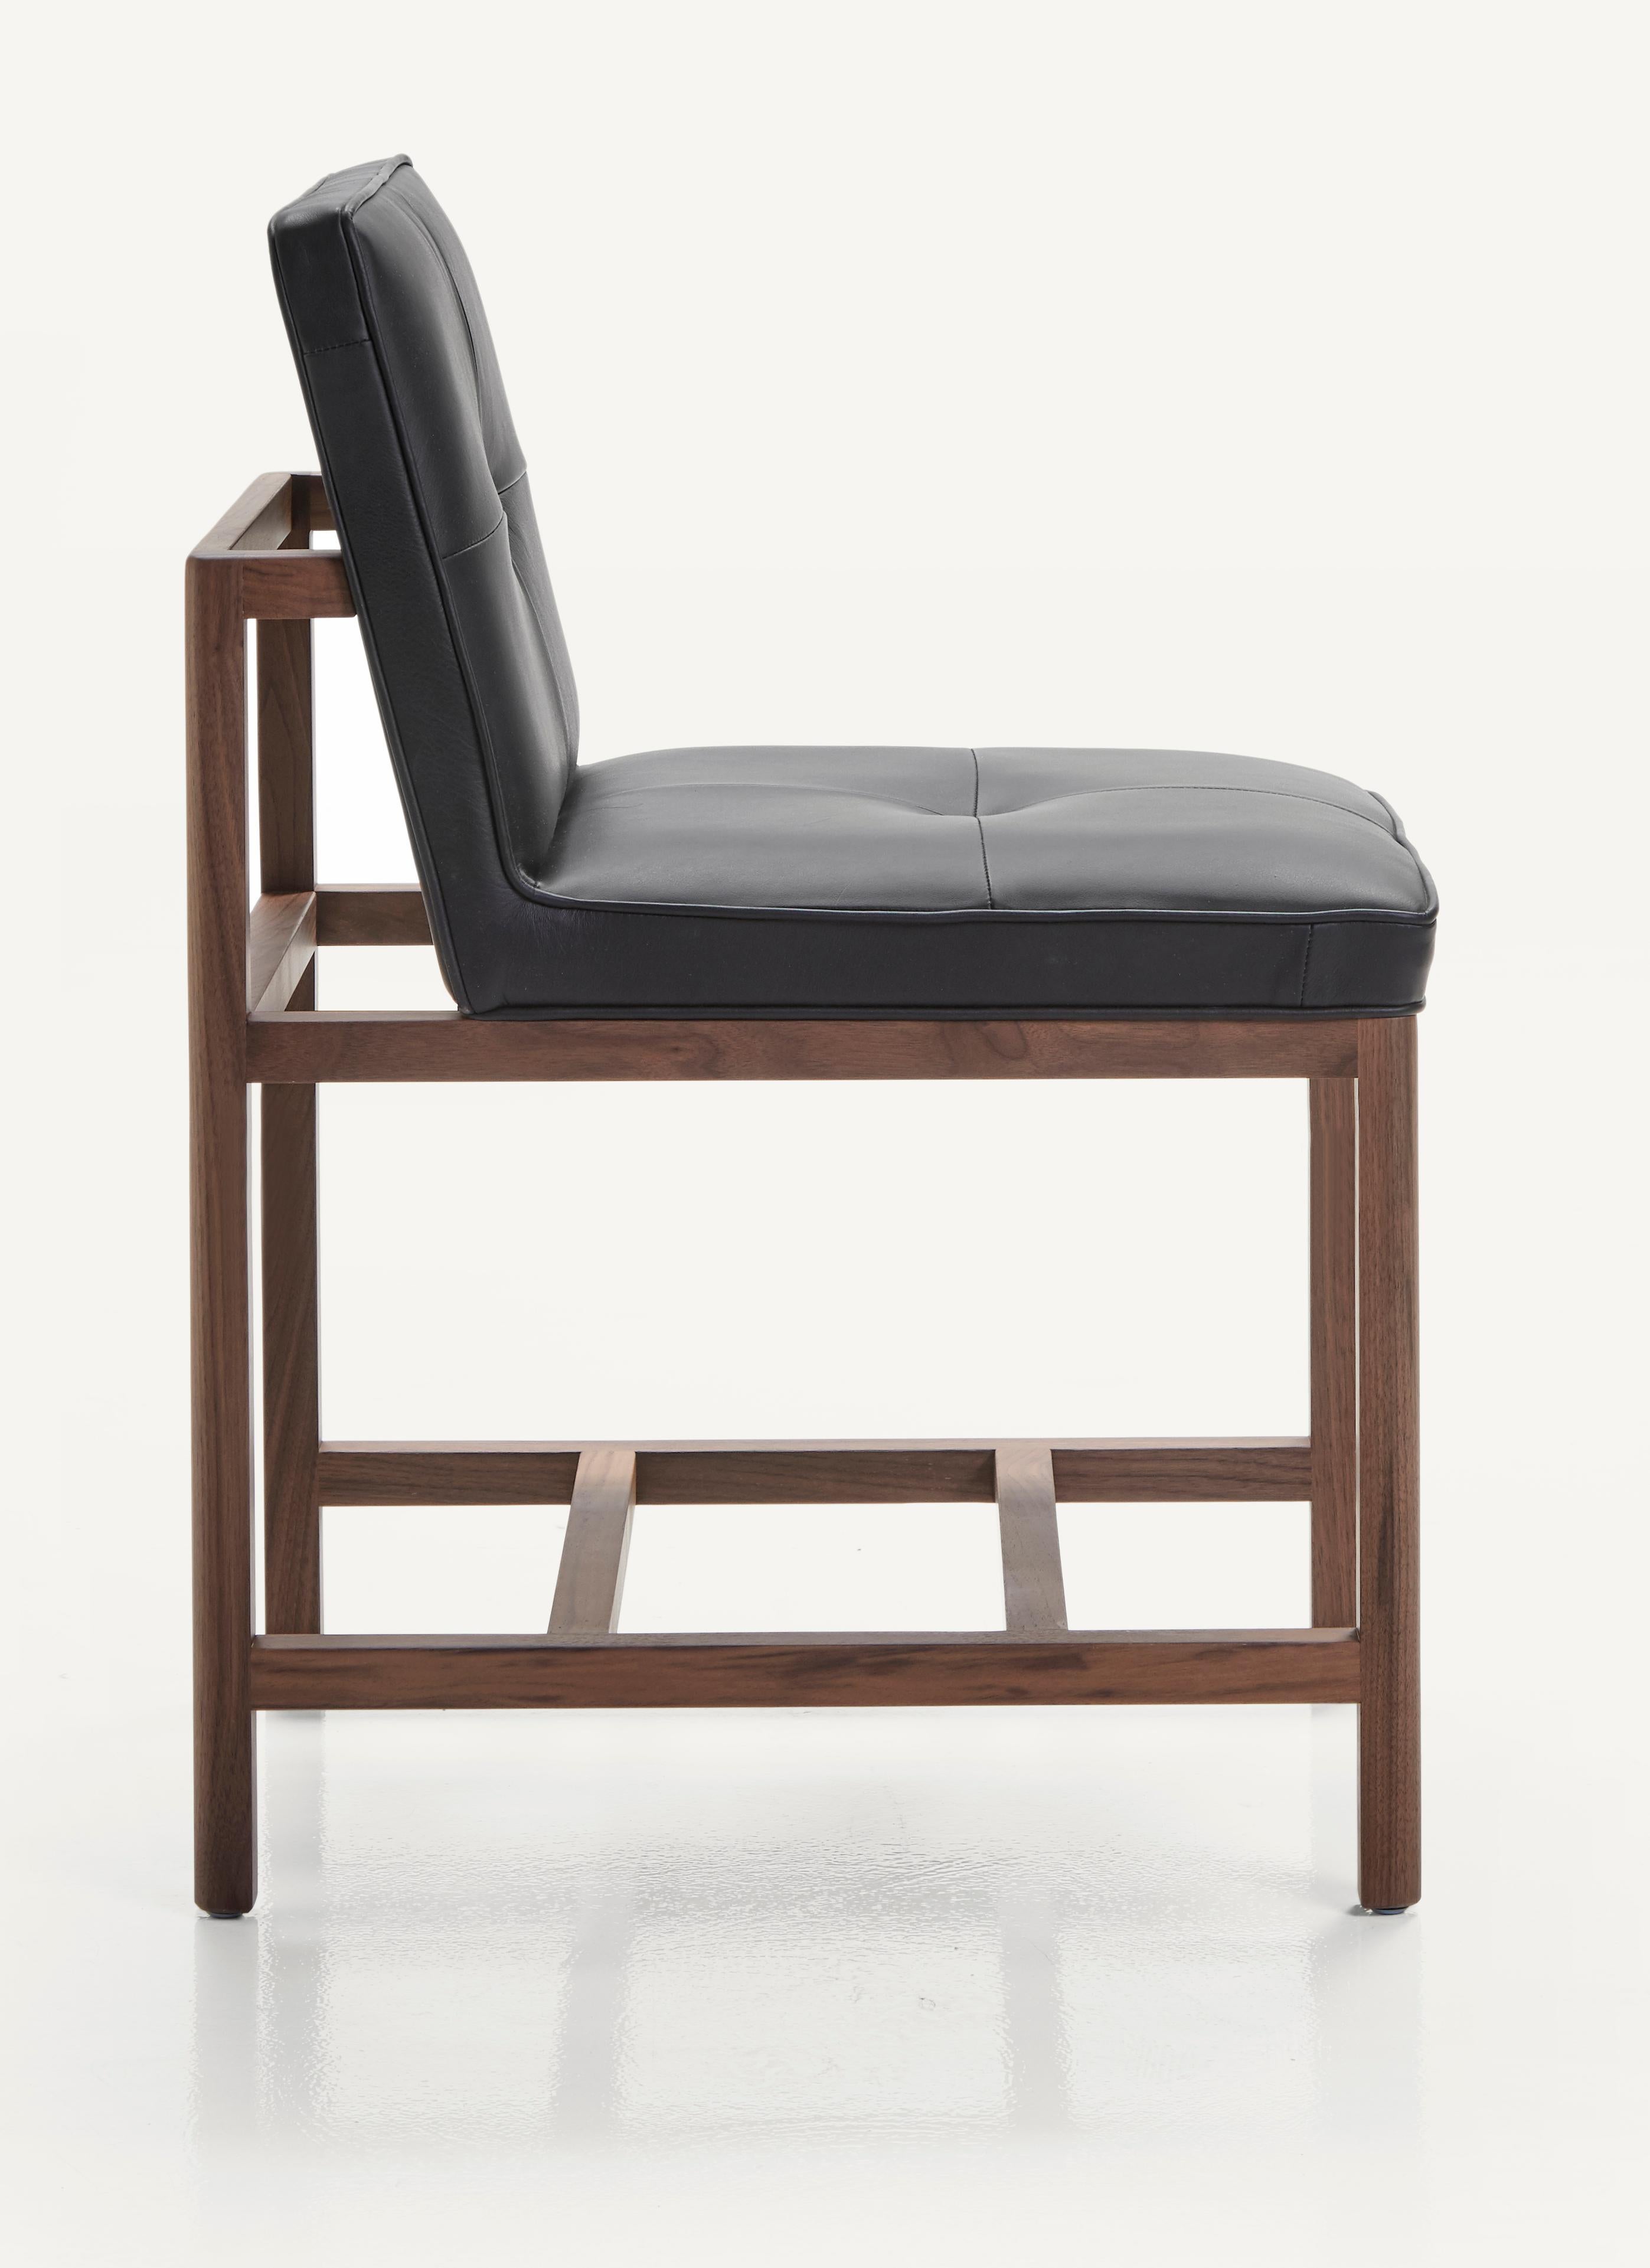 For Sale: Black (Comfort 99991 Black) Wood Frame Armless Chair Petit in Walnut and Leather Designed by Craig Bassam 5